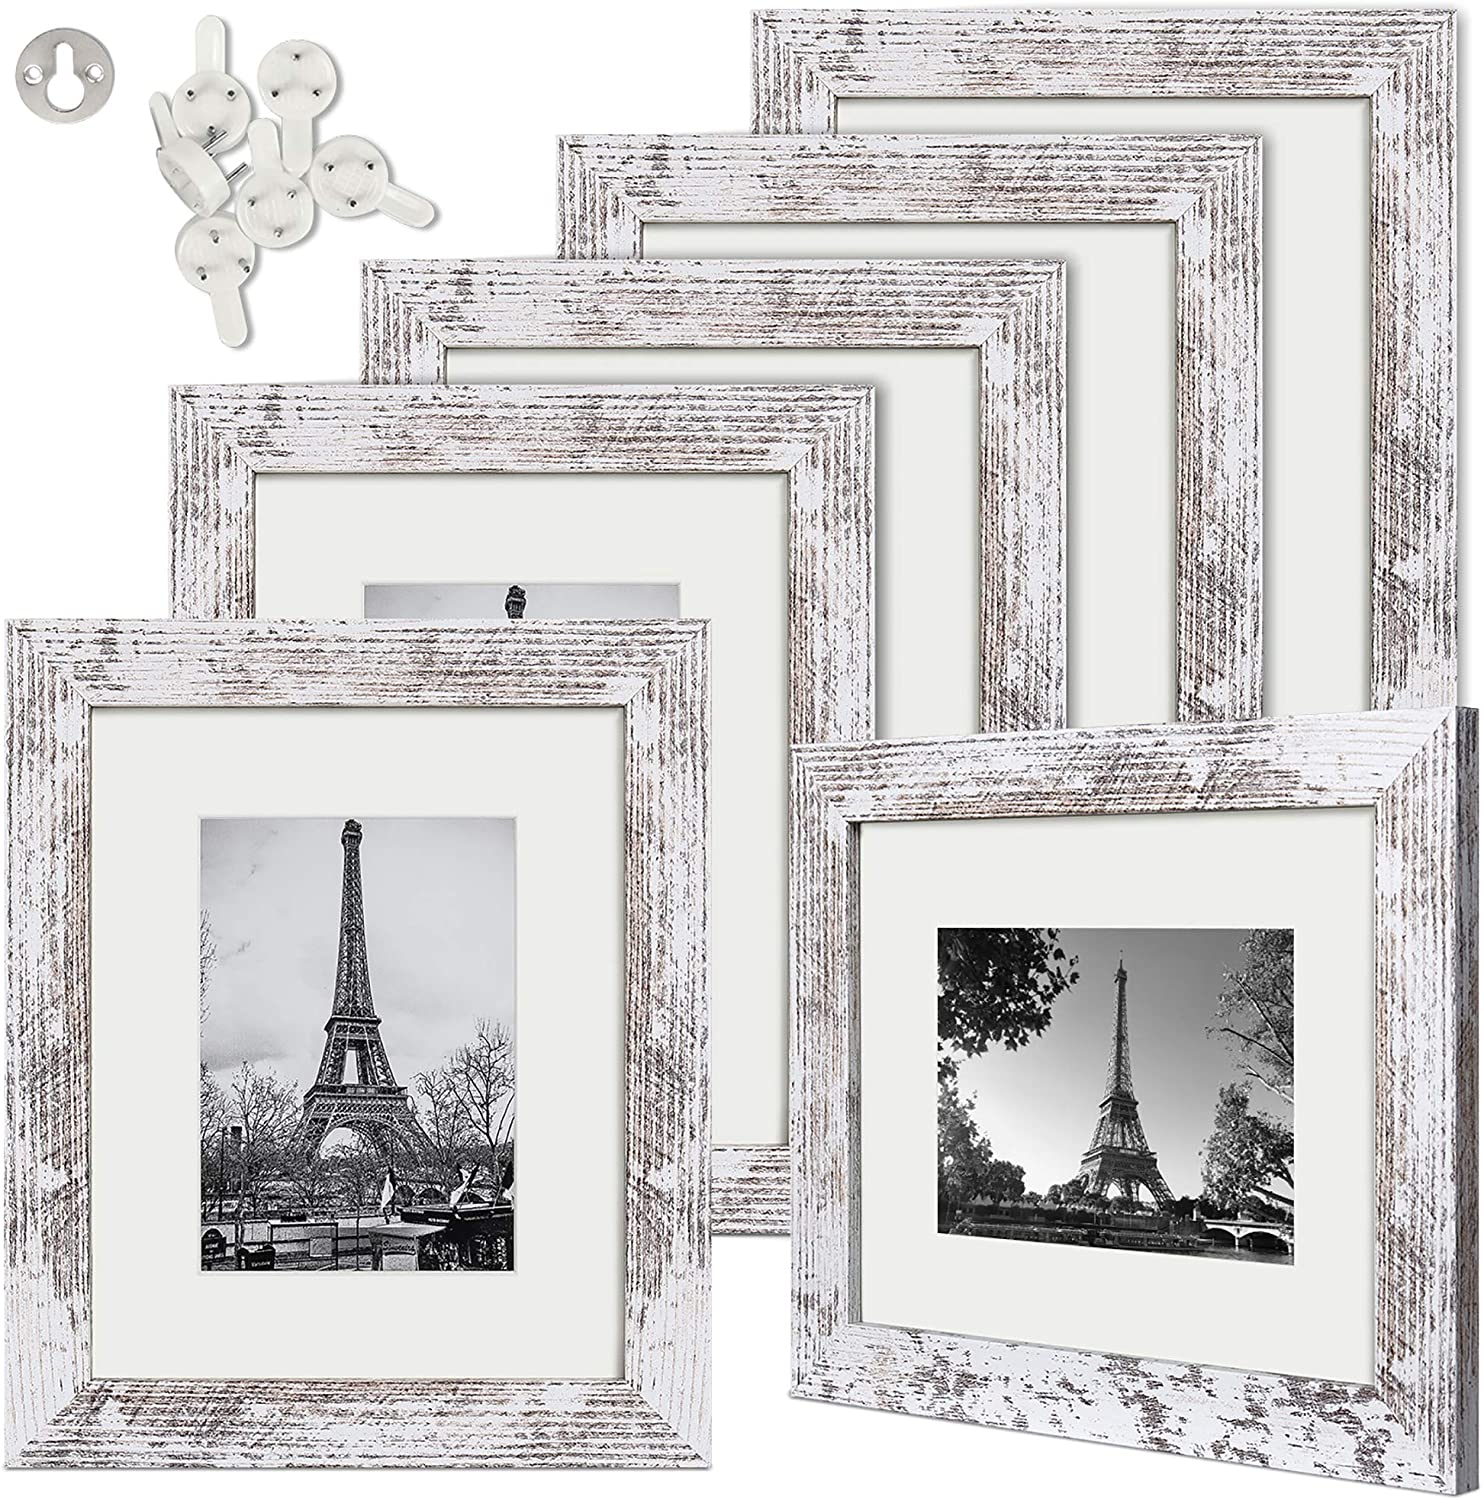  upsimples 8x8 Picture Frame Made of High Definition Glass,  Display Pictures 5x5 with Mat or 8x8 Without Mat, Gallery Wall Frame Set,  White